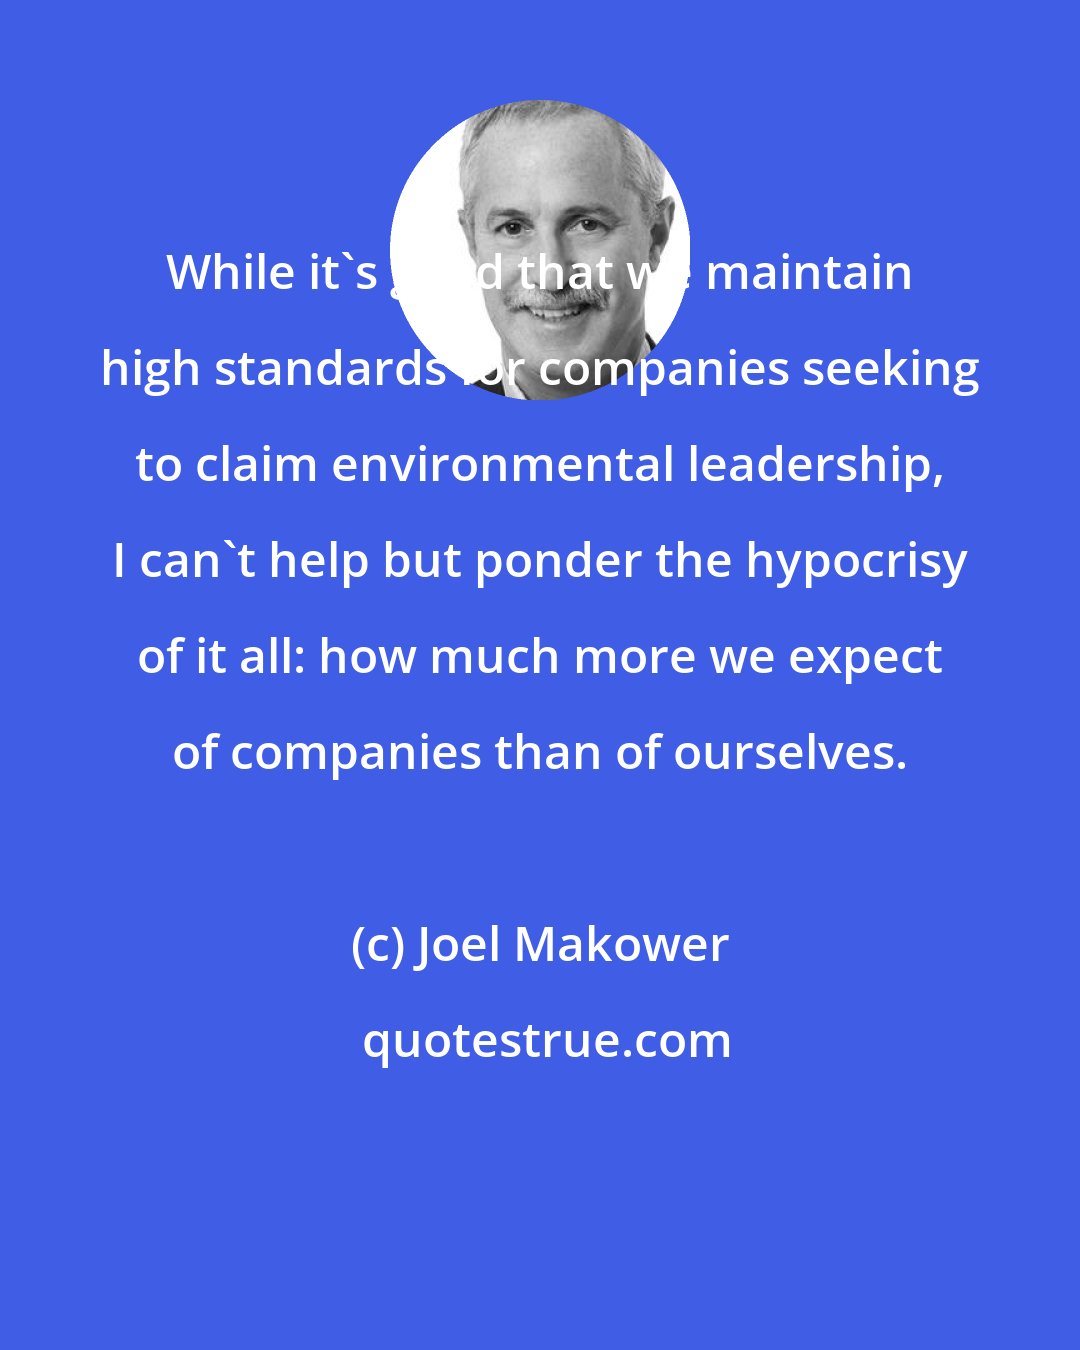 Joel Makower: While it's good that we maintain high standards for companies seeking to claim environmental leadership, I can't help but ponder the hypocrisy of it all: how much more we expect of companies than of ourselves.